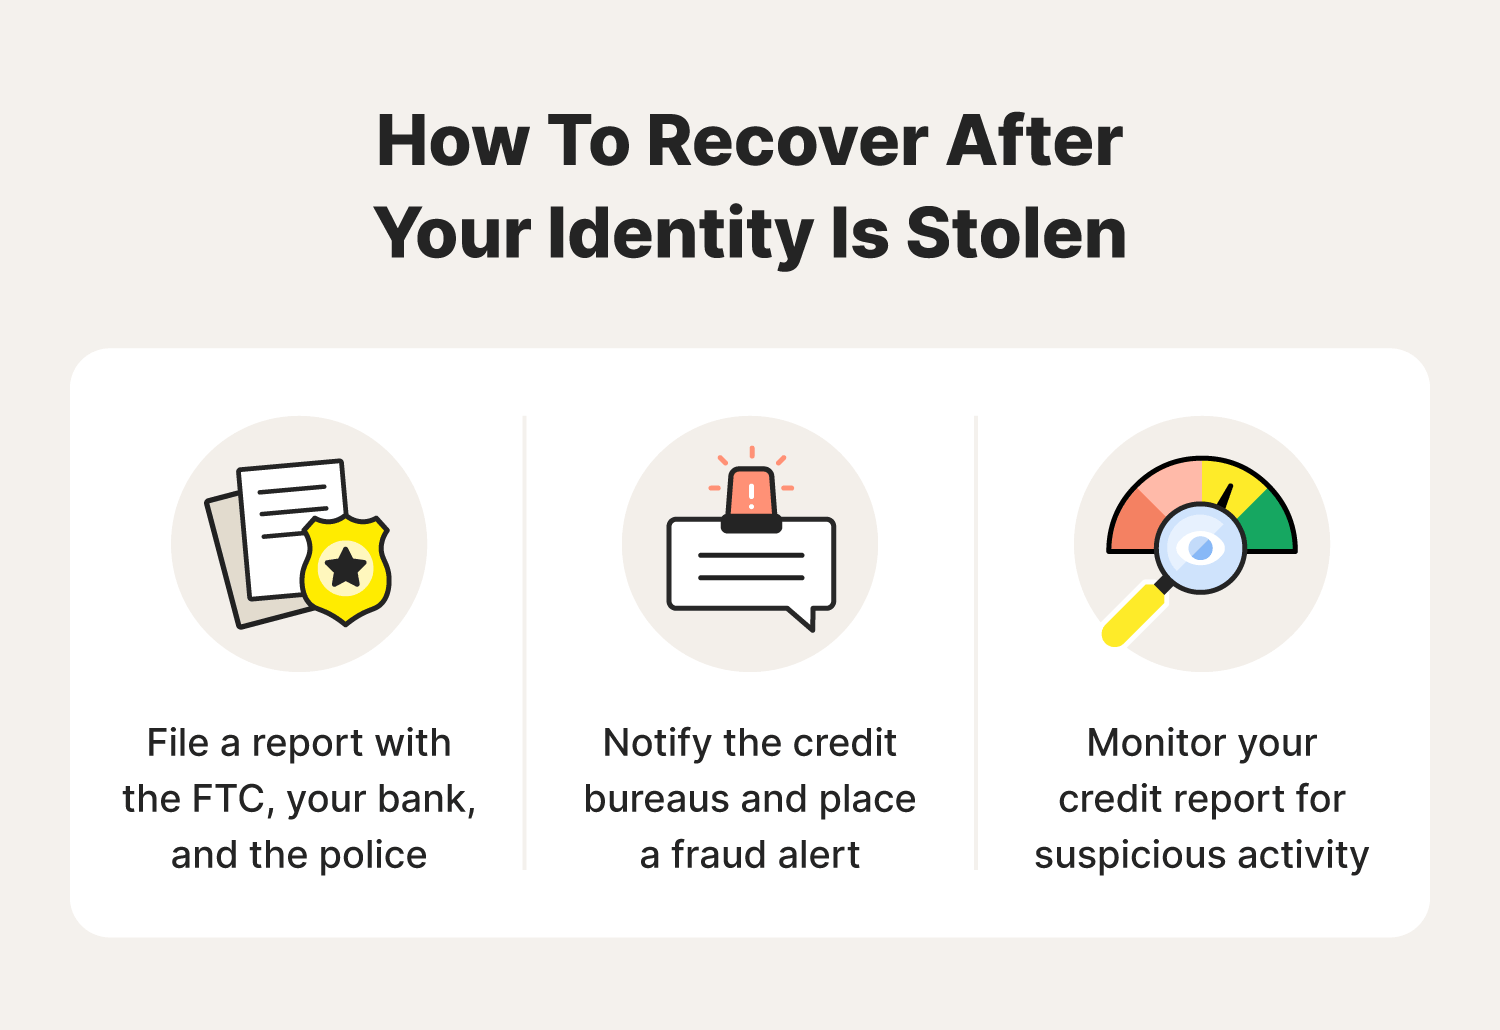 Tips to recover after your identity is stolen.